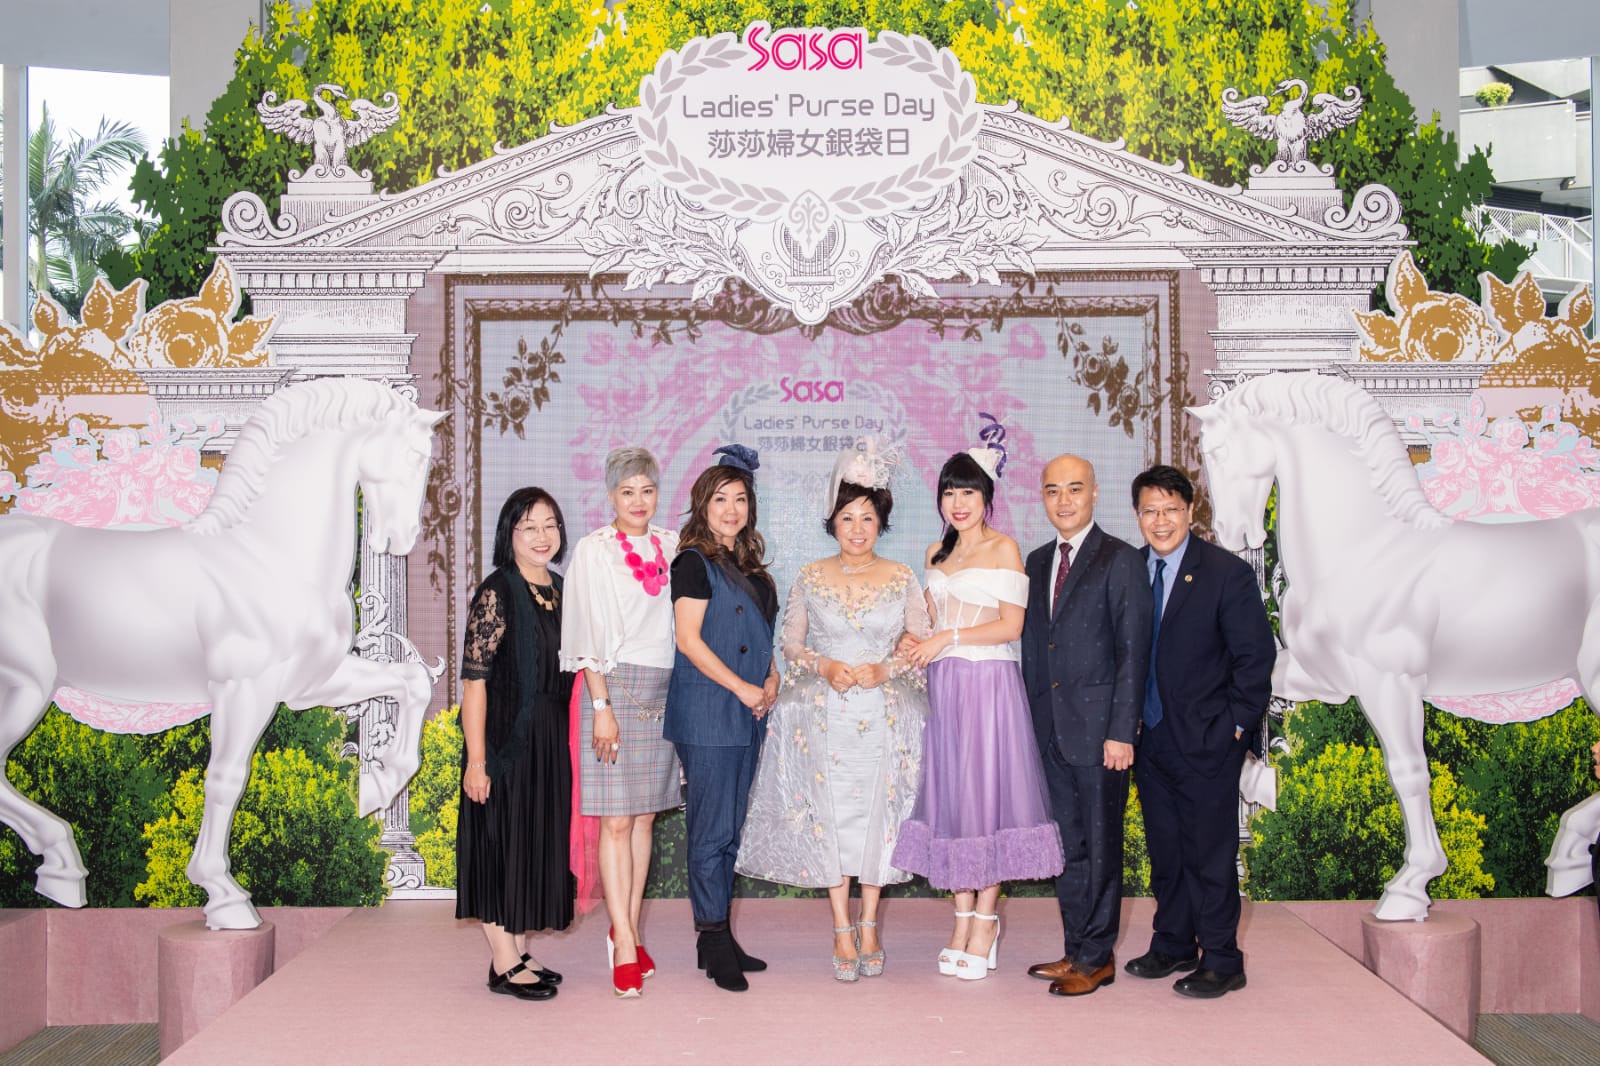 Brand Activity丨La Estephe & SaSa Ladies’ Purse Day: Jointly Fulfilling the Beauty Event